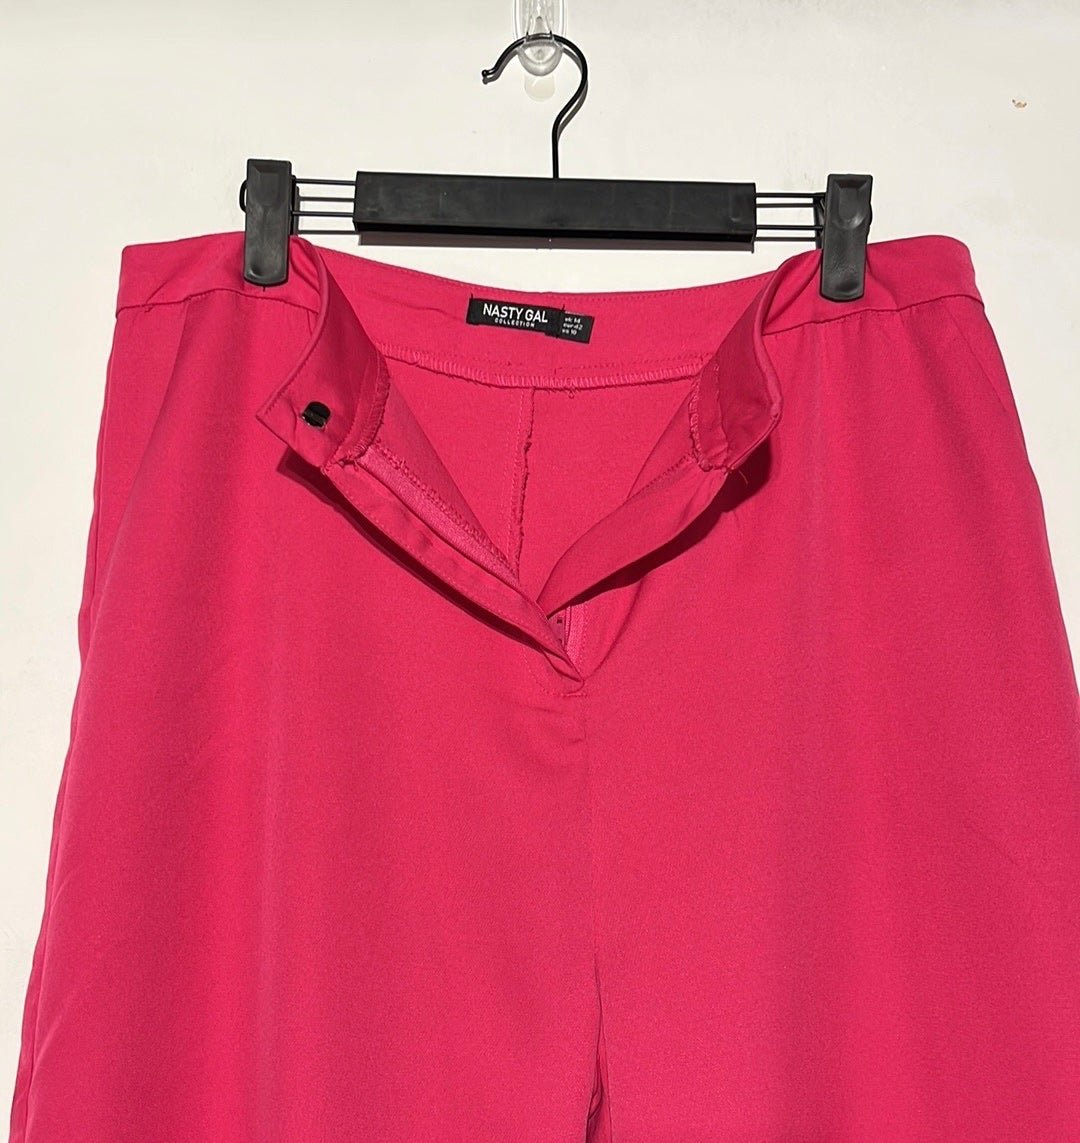 Promotions  NEW Nasty Gal Hot Pink Tailored High Waisted Wide Leg Pants Size 10 OWkexsUq5 Online Shop